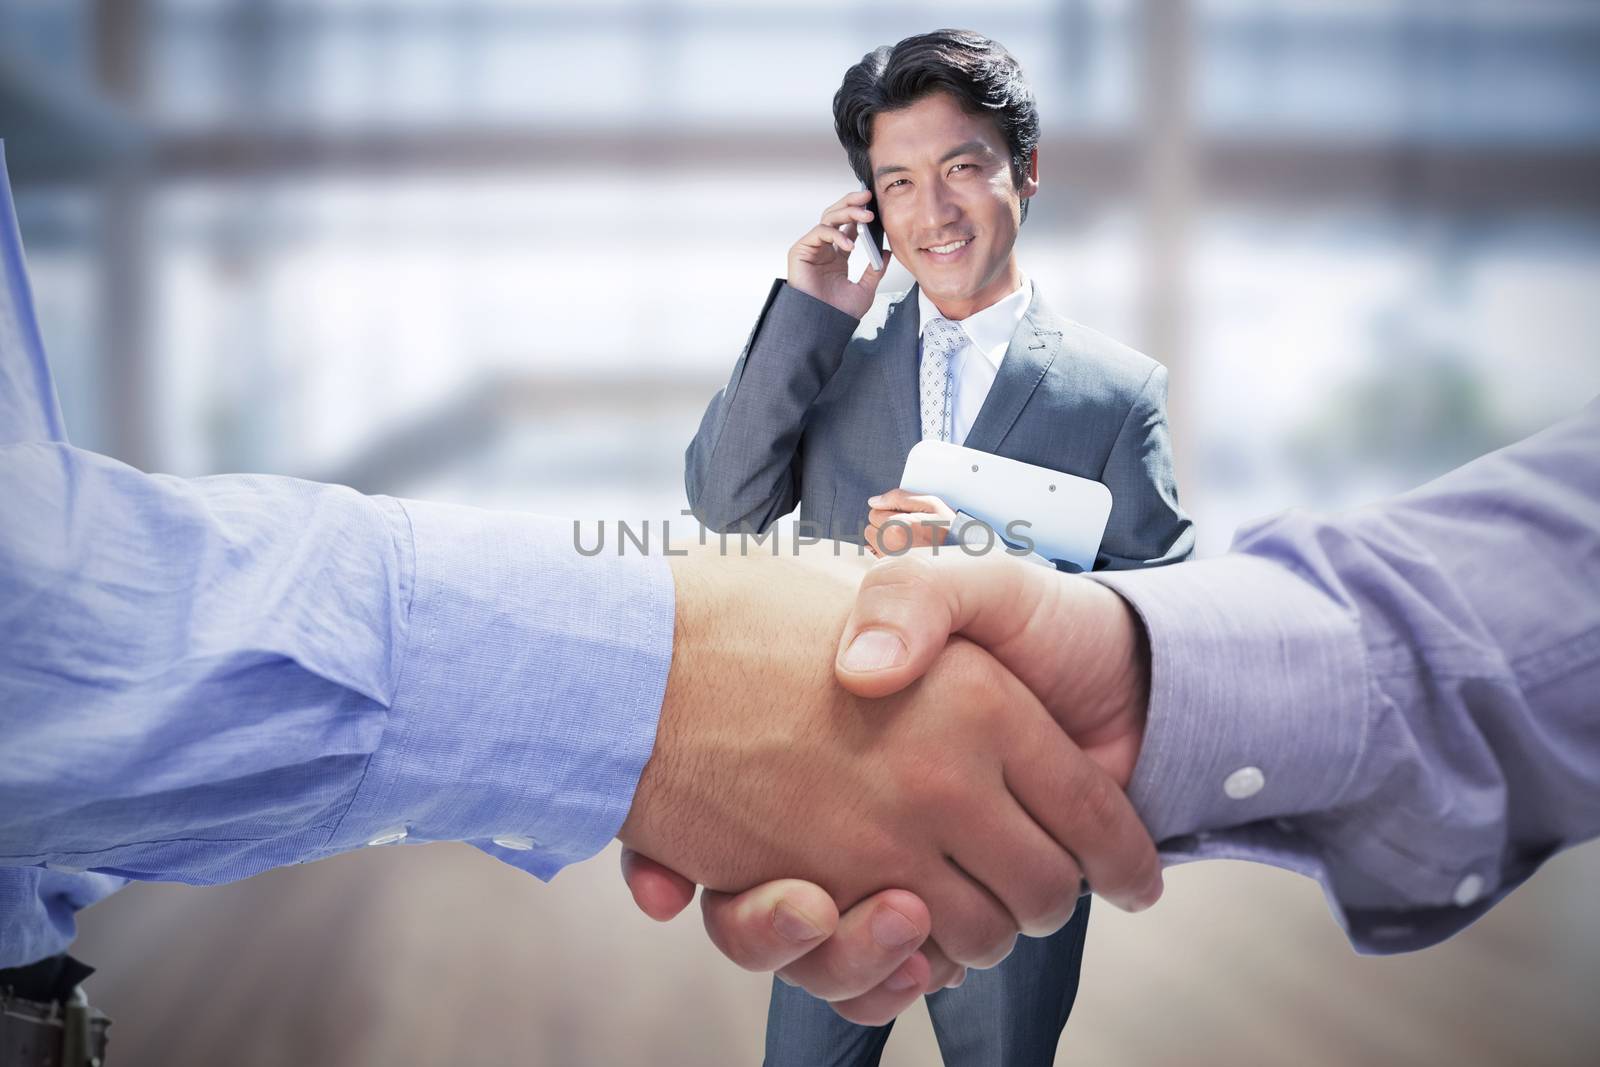 Composite image of two men shaking hands in office